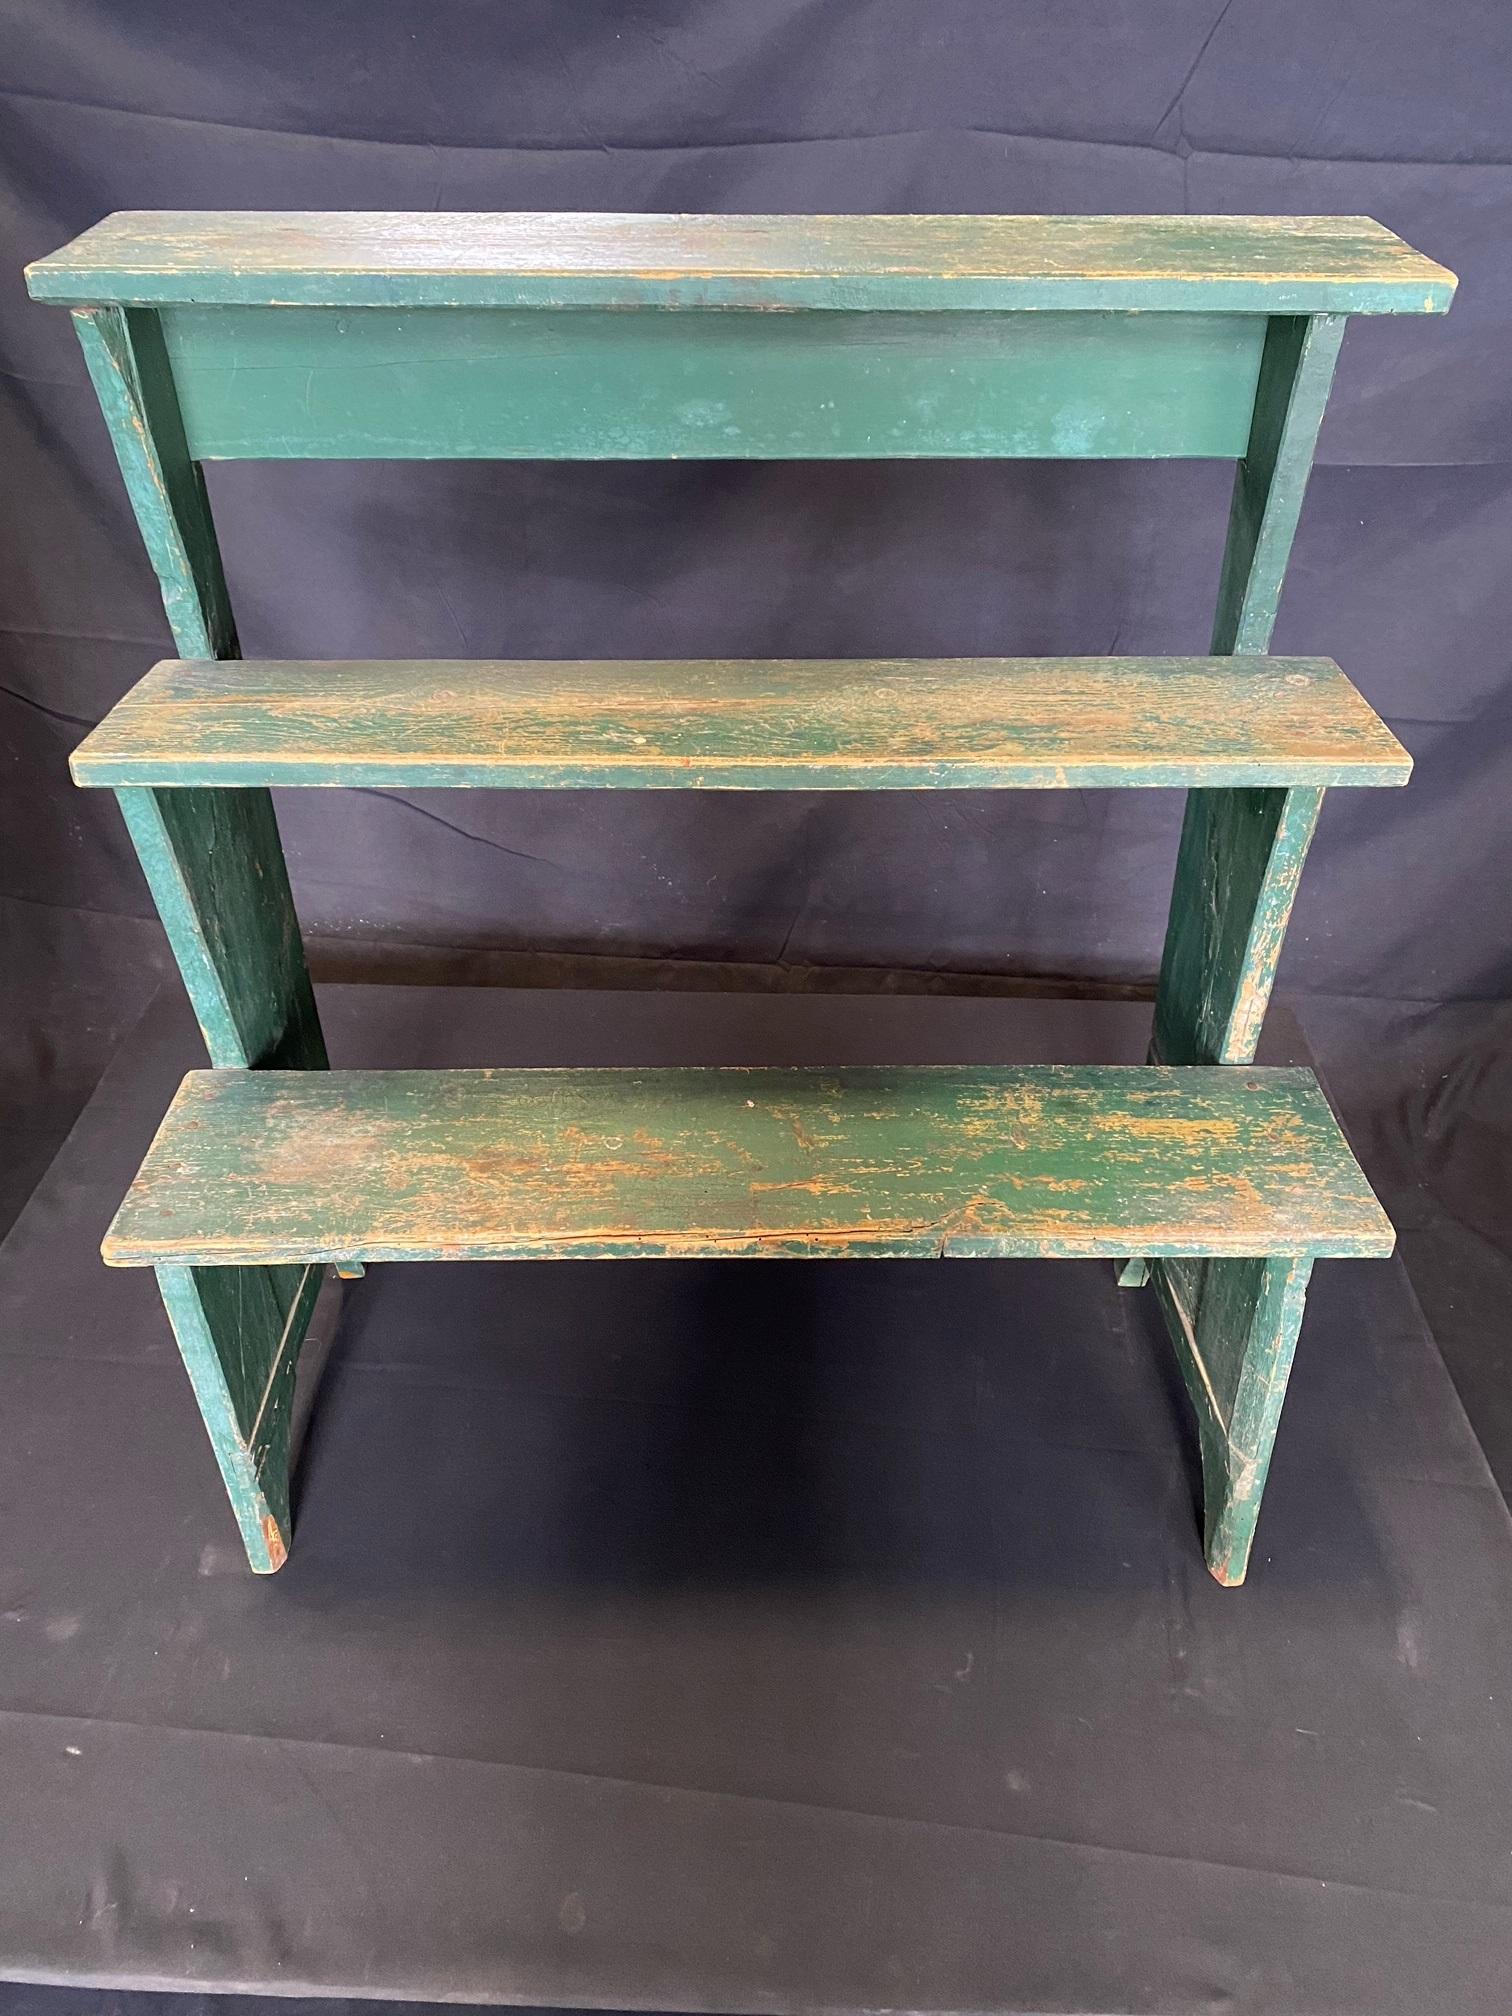 Rustic 19th Century Painted Tall French Waterfall Garden Pot Shelves or Stairs For Sale 7